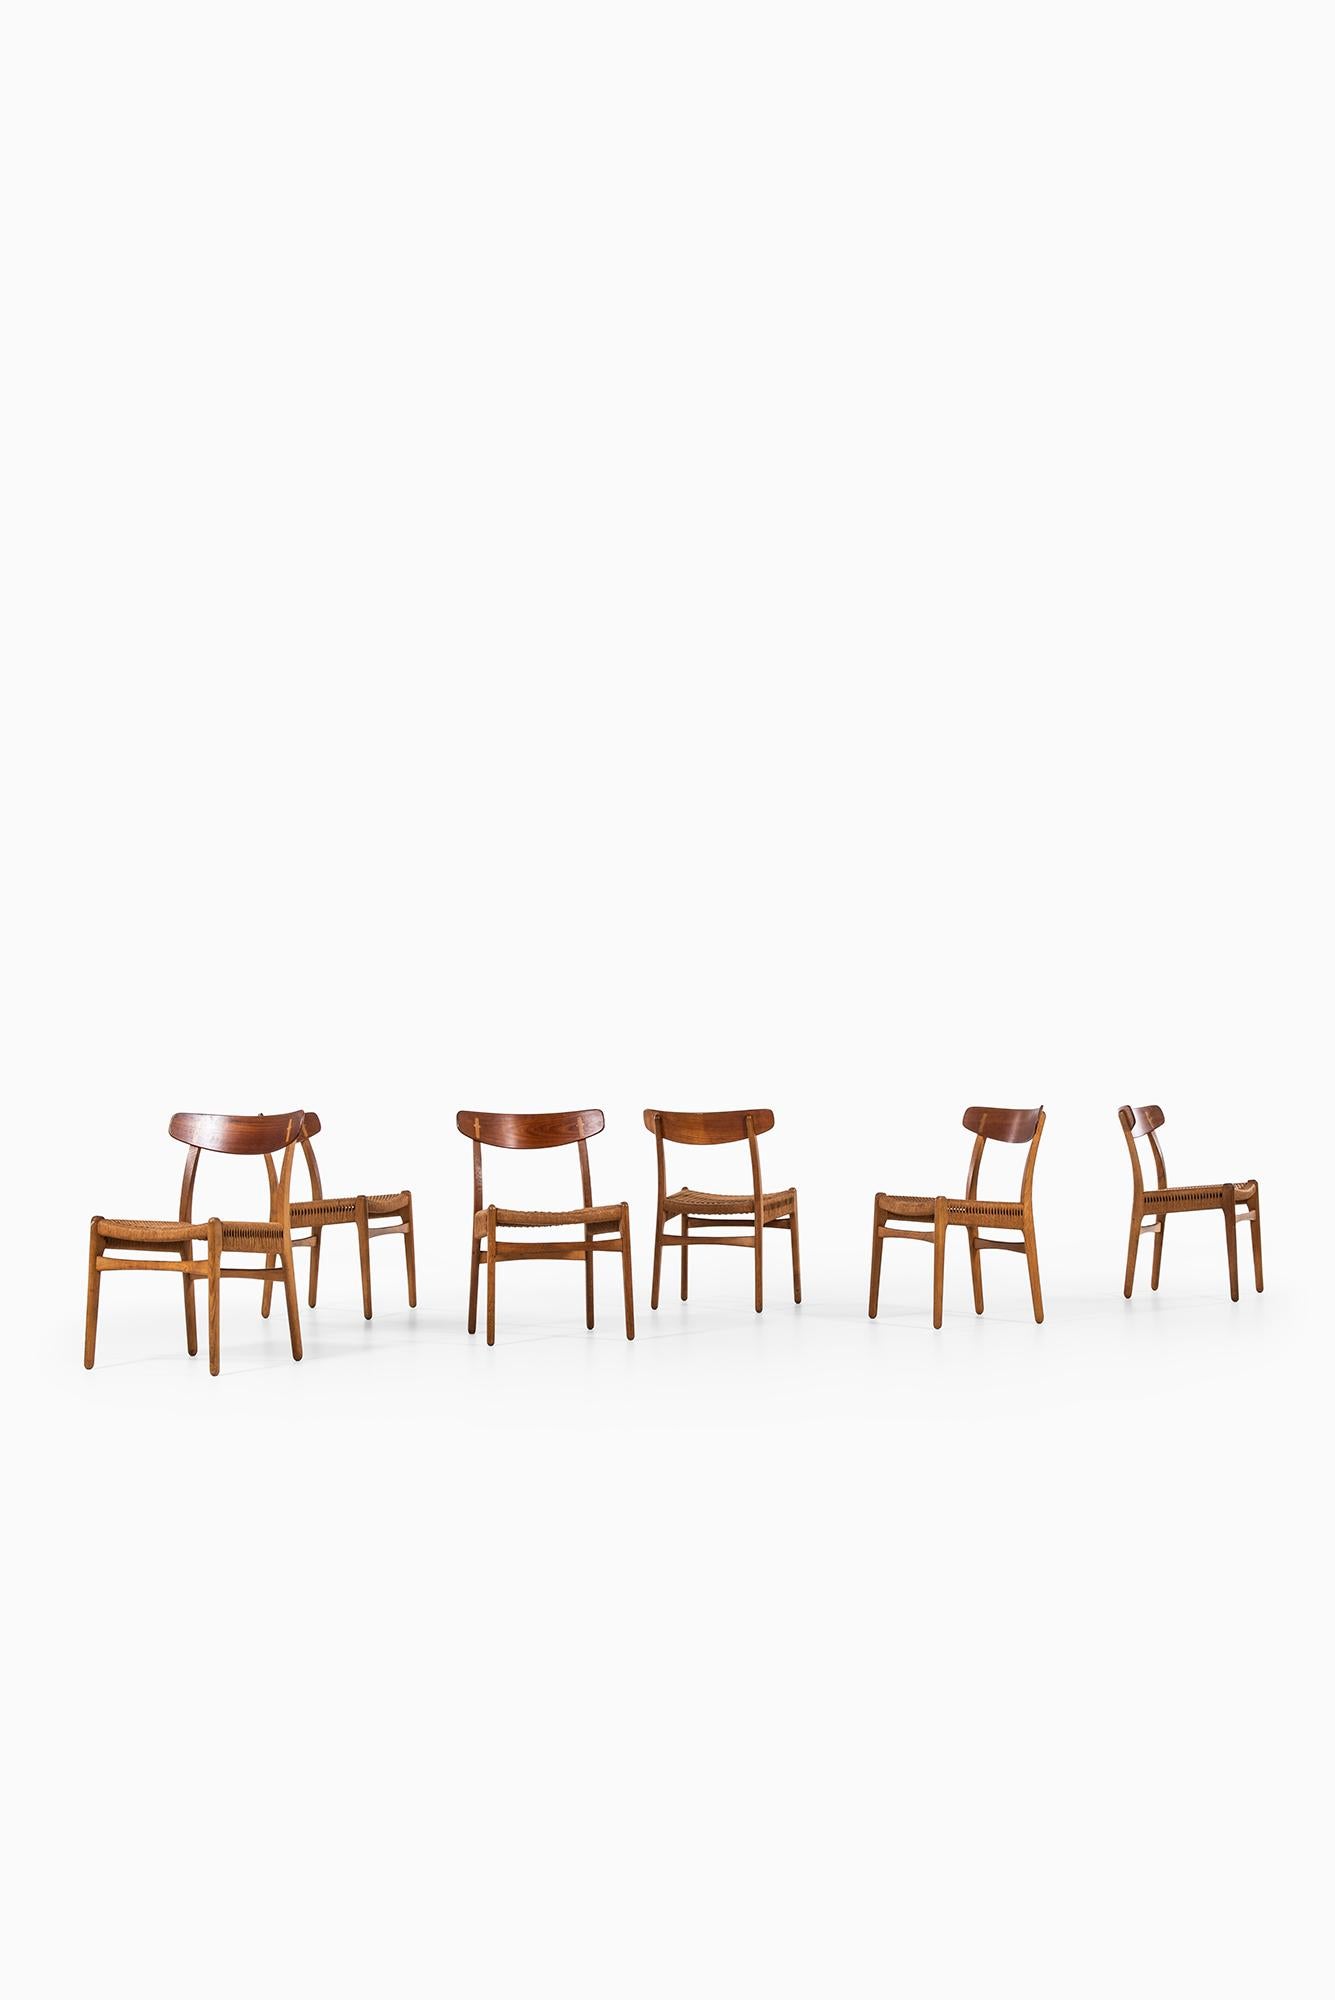 Set of six dining chairs model CH-23 designed by Hans Wegner. Produced by Carl Hansen & Son in Denmark.